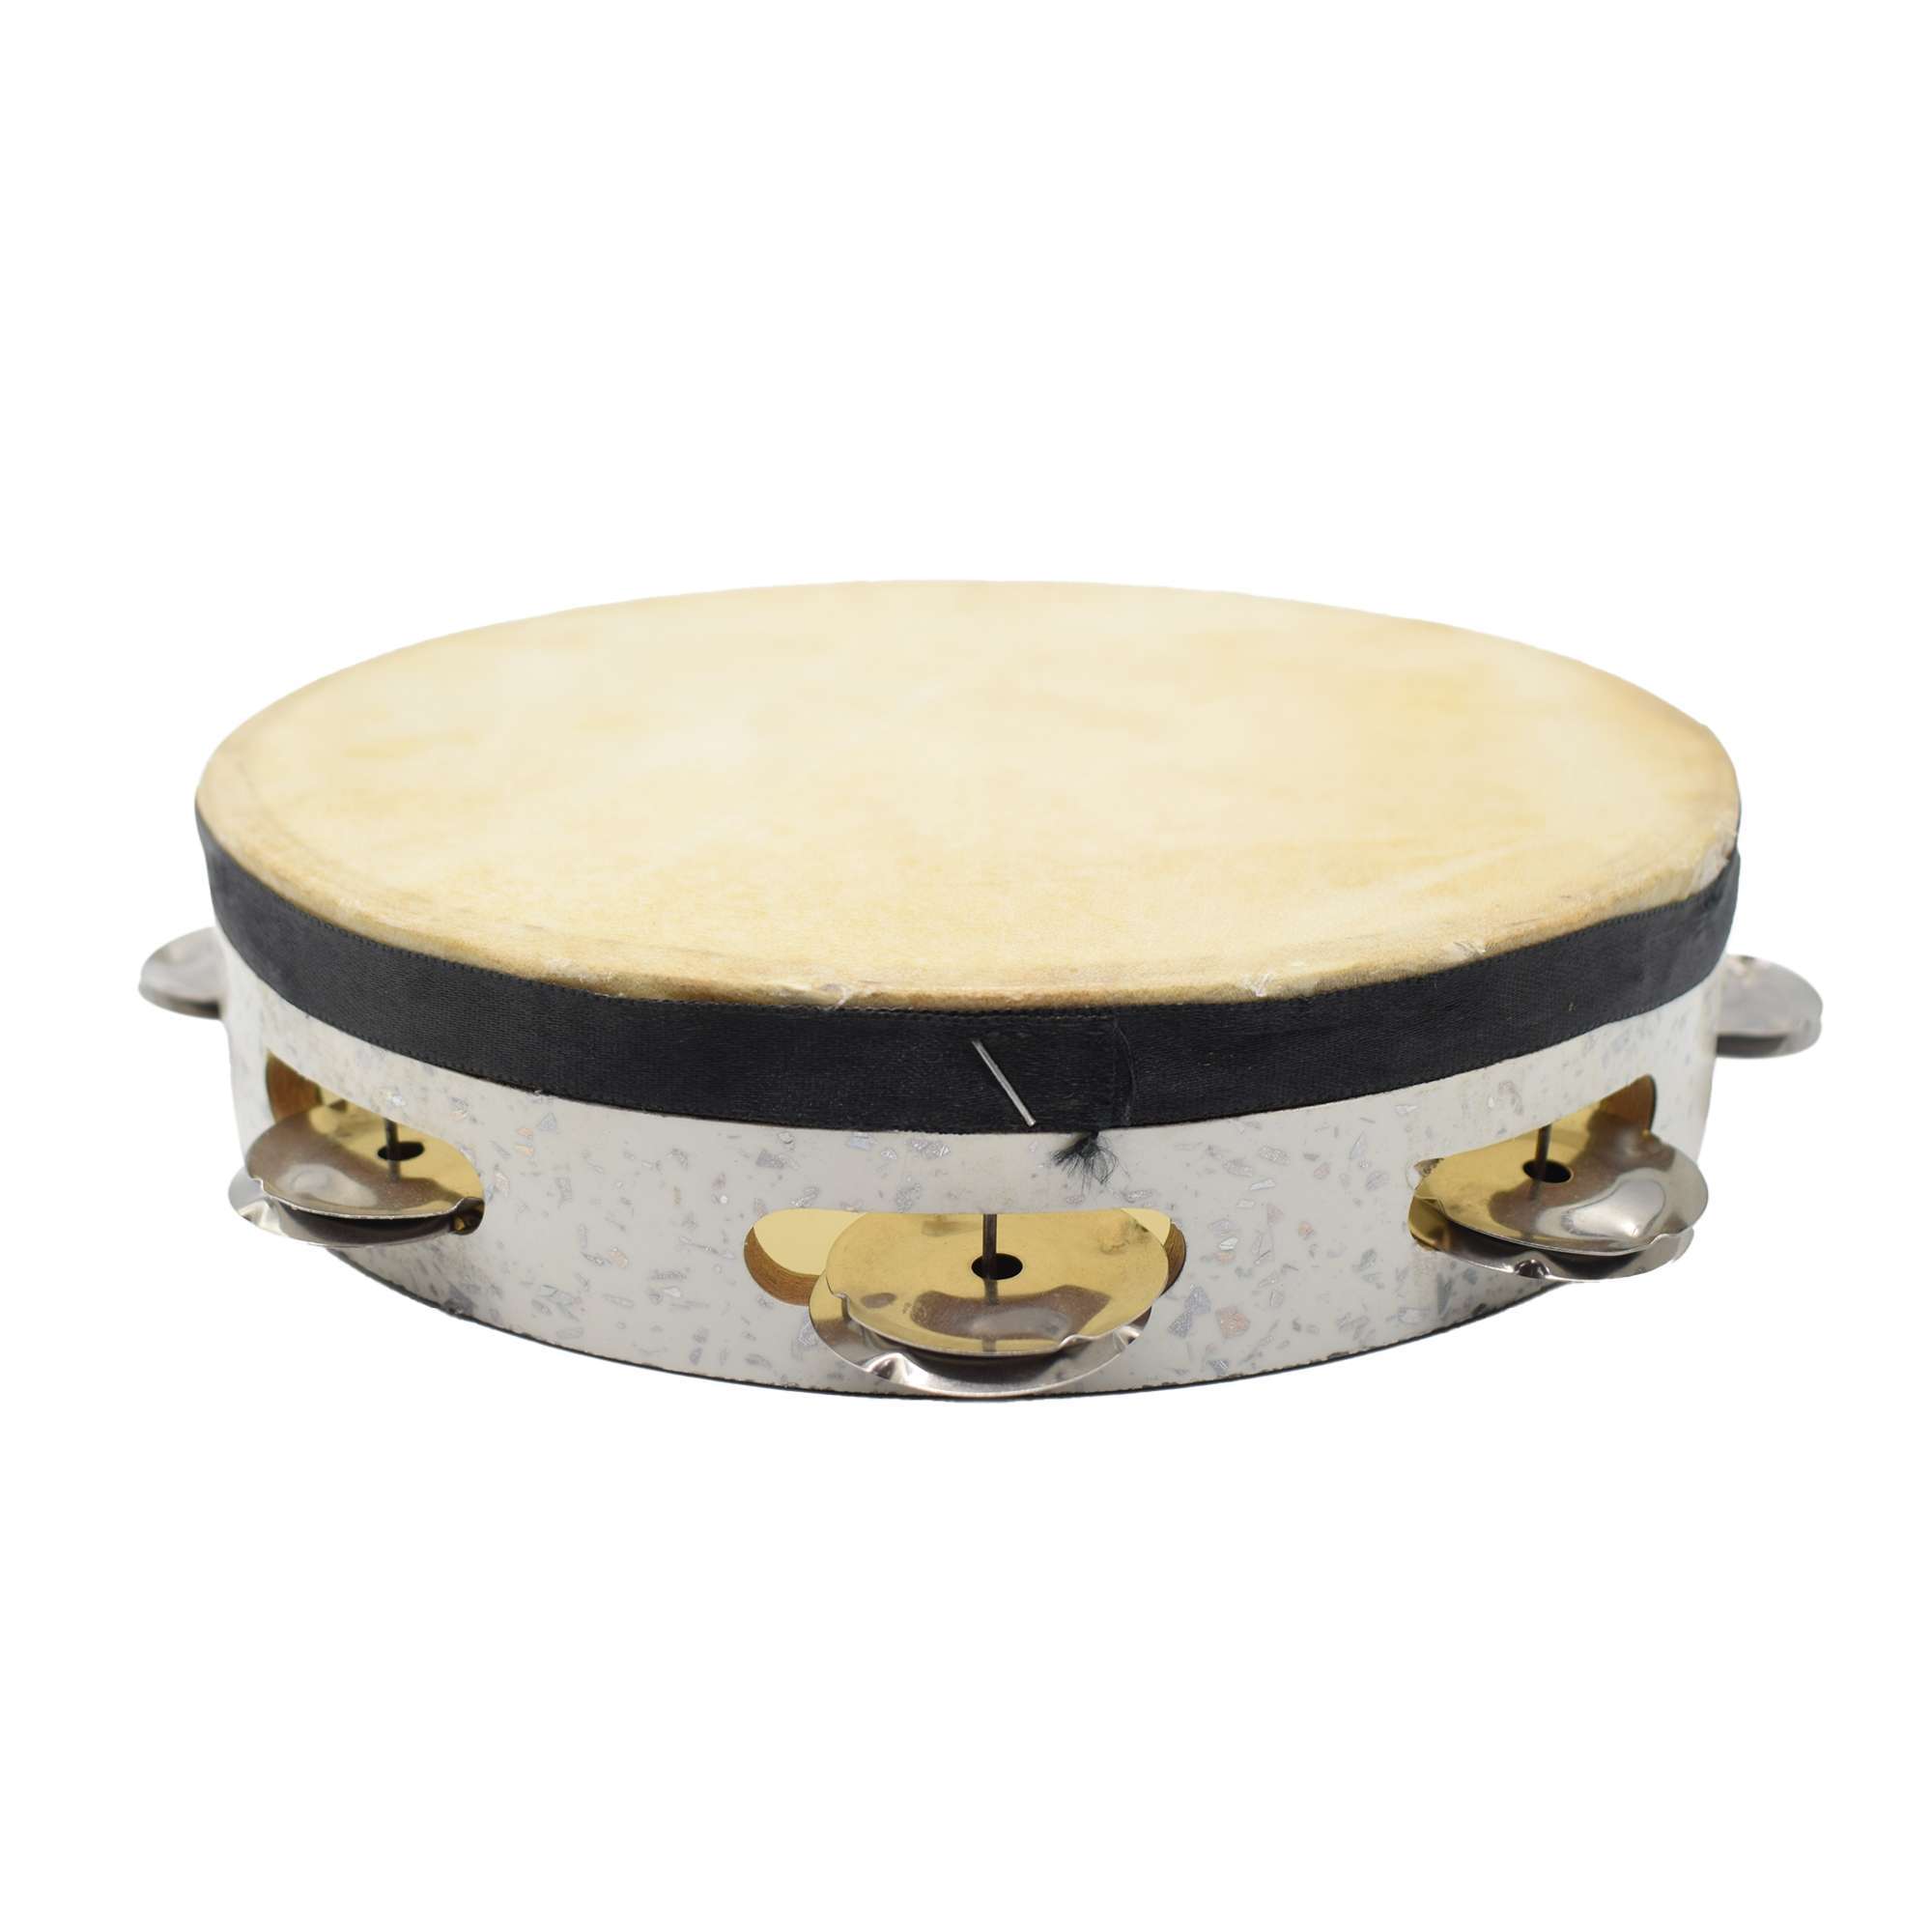 Tambourine Hand Percussion Musical Instrument 9 Inch » Puja N Pujari - Book Pandit for Puja, Astrologer & Temple Services Online